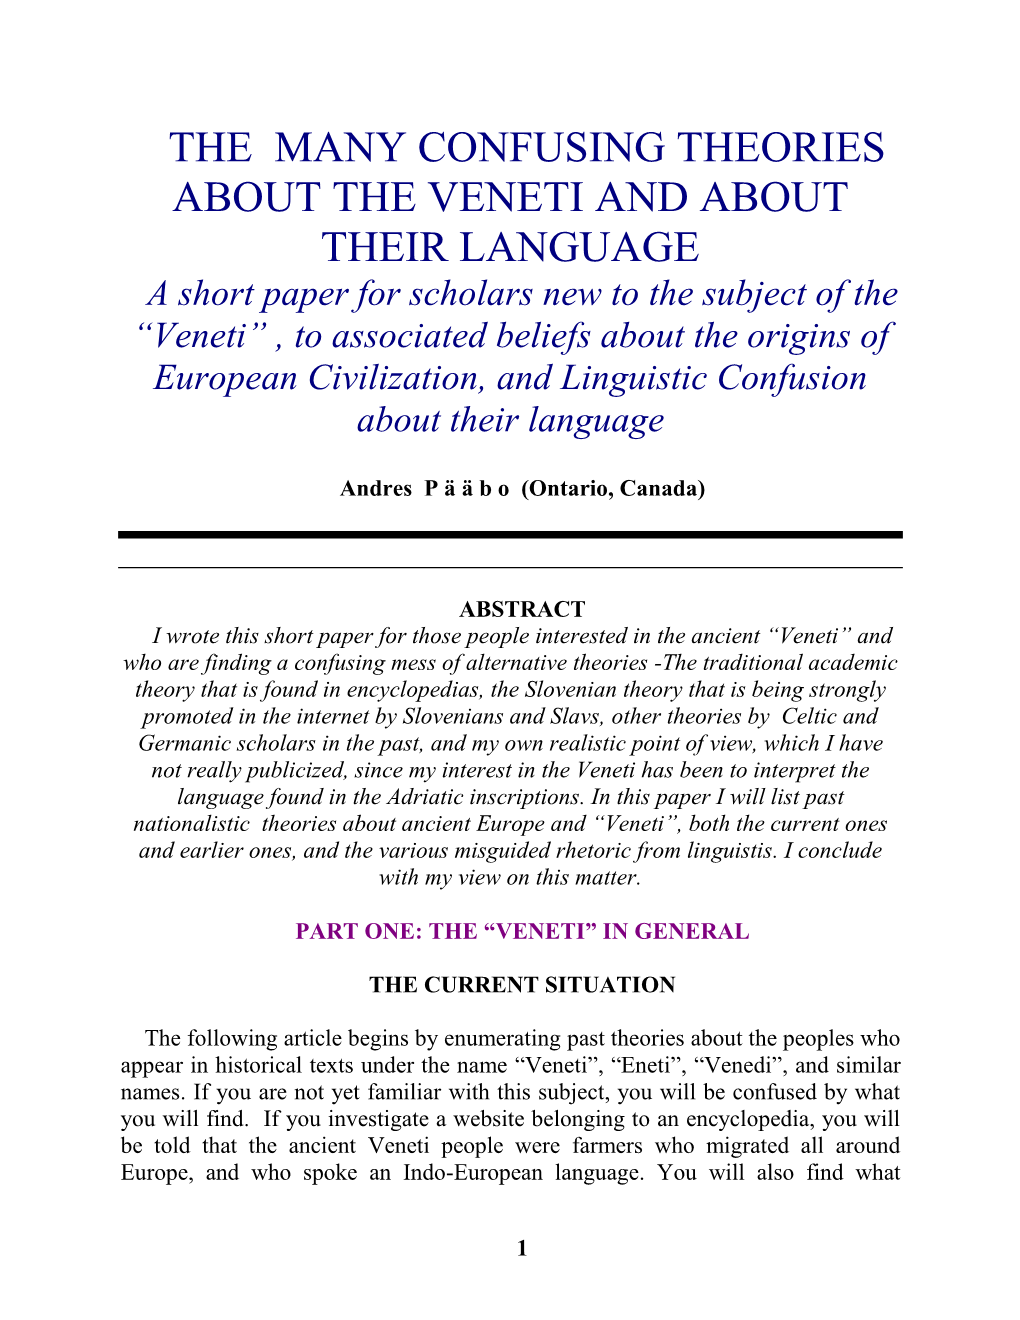 The Many Confusing Theories About the Veneti